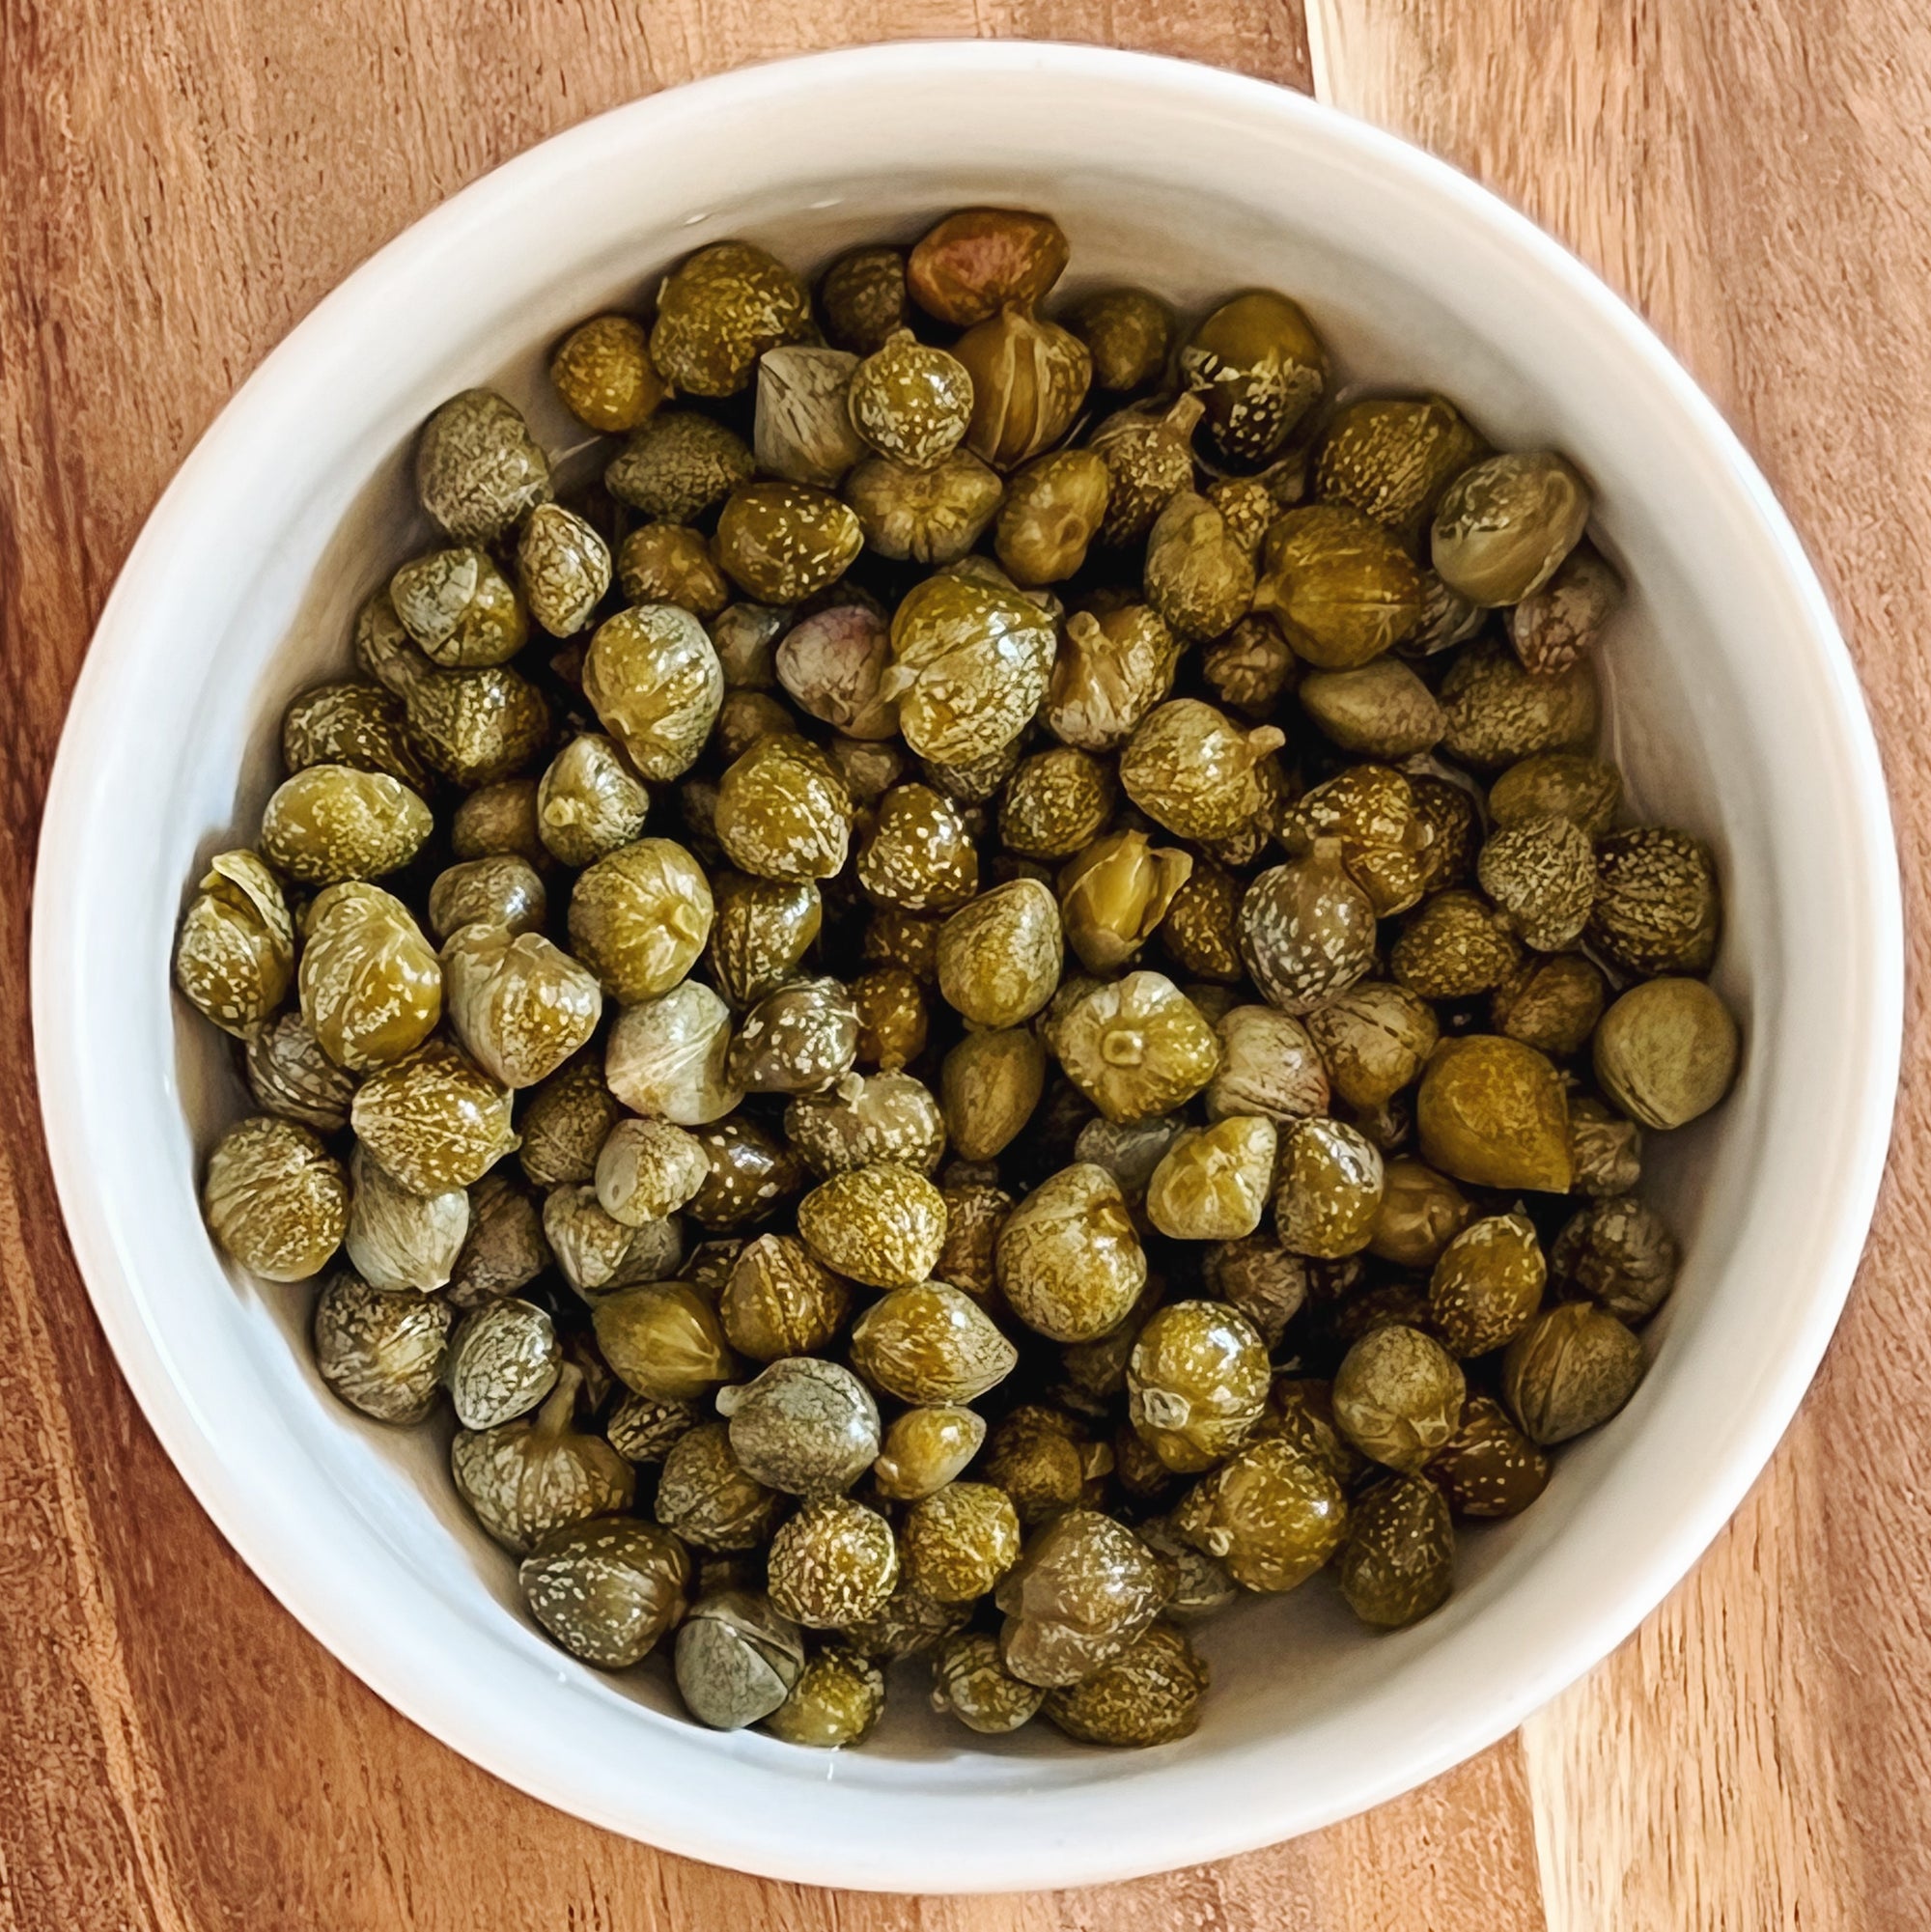 Lilliput capers - a tiny bowl full of tiny capers - Donostia Foods